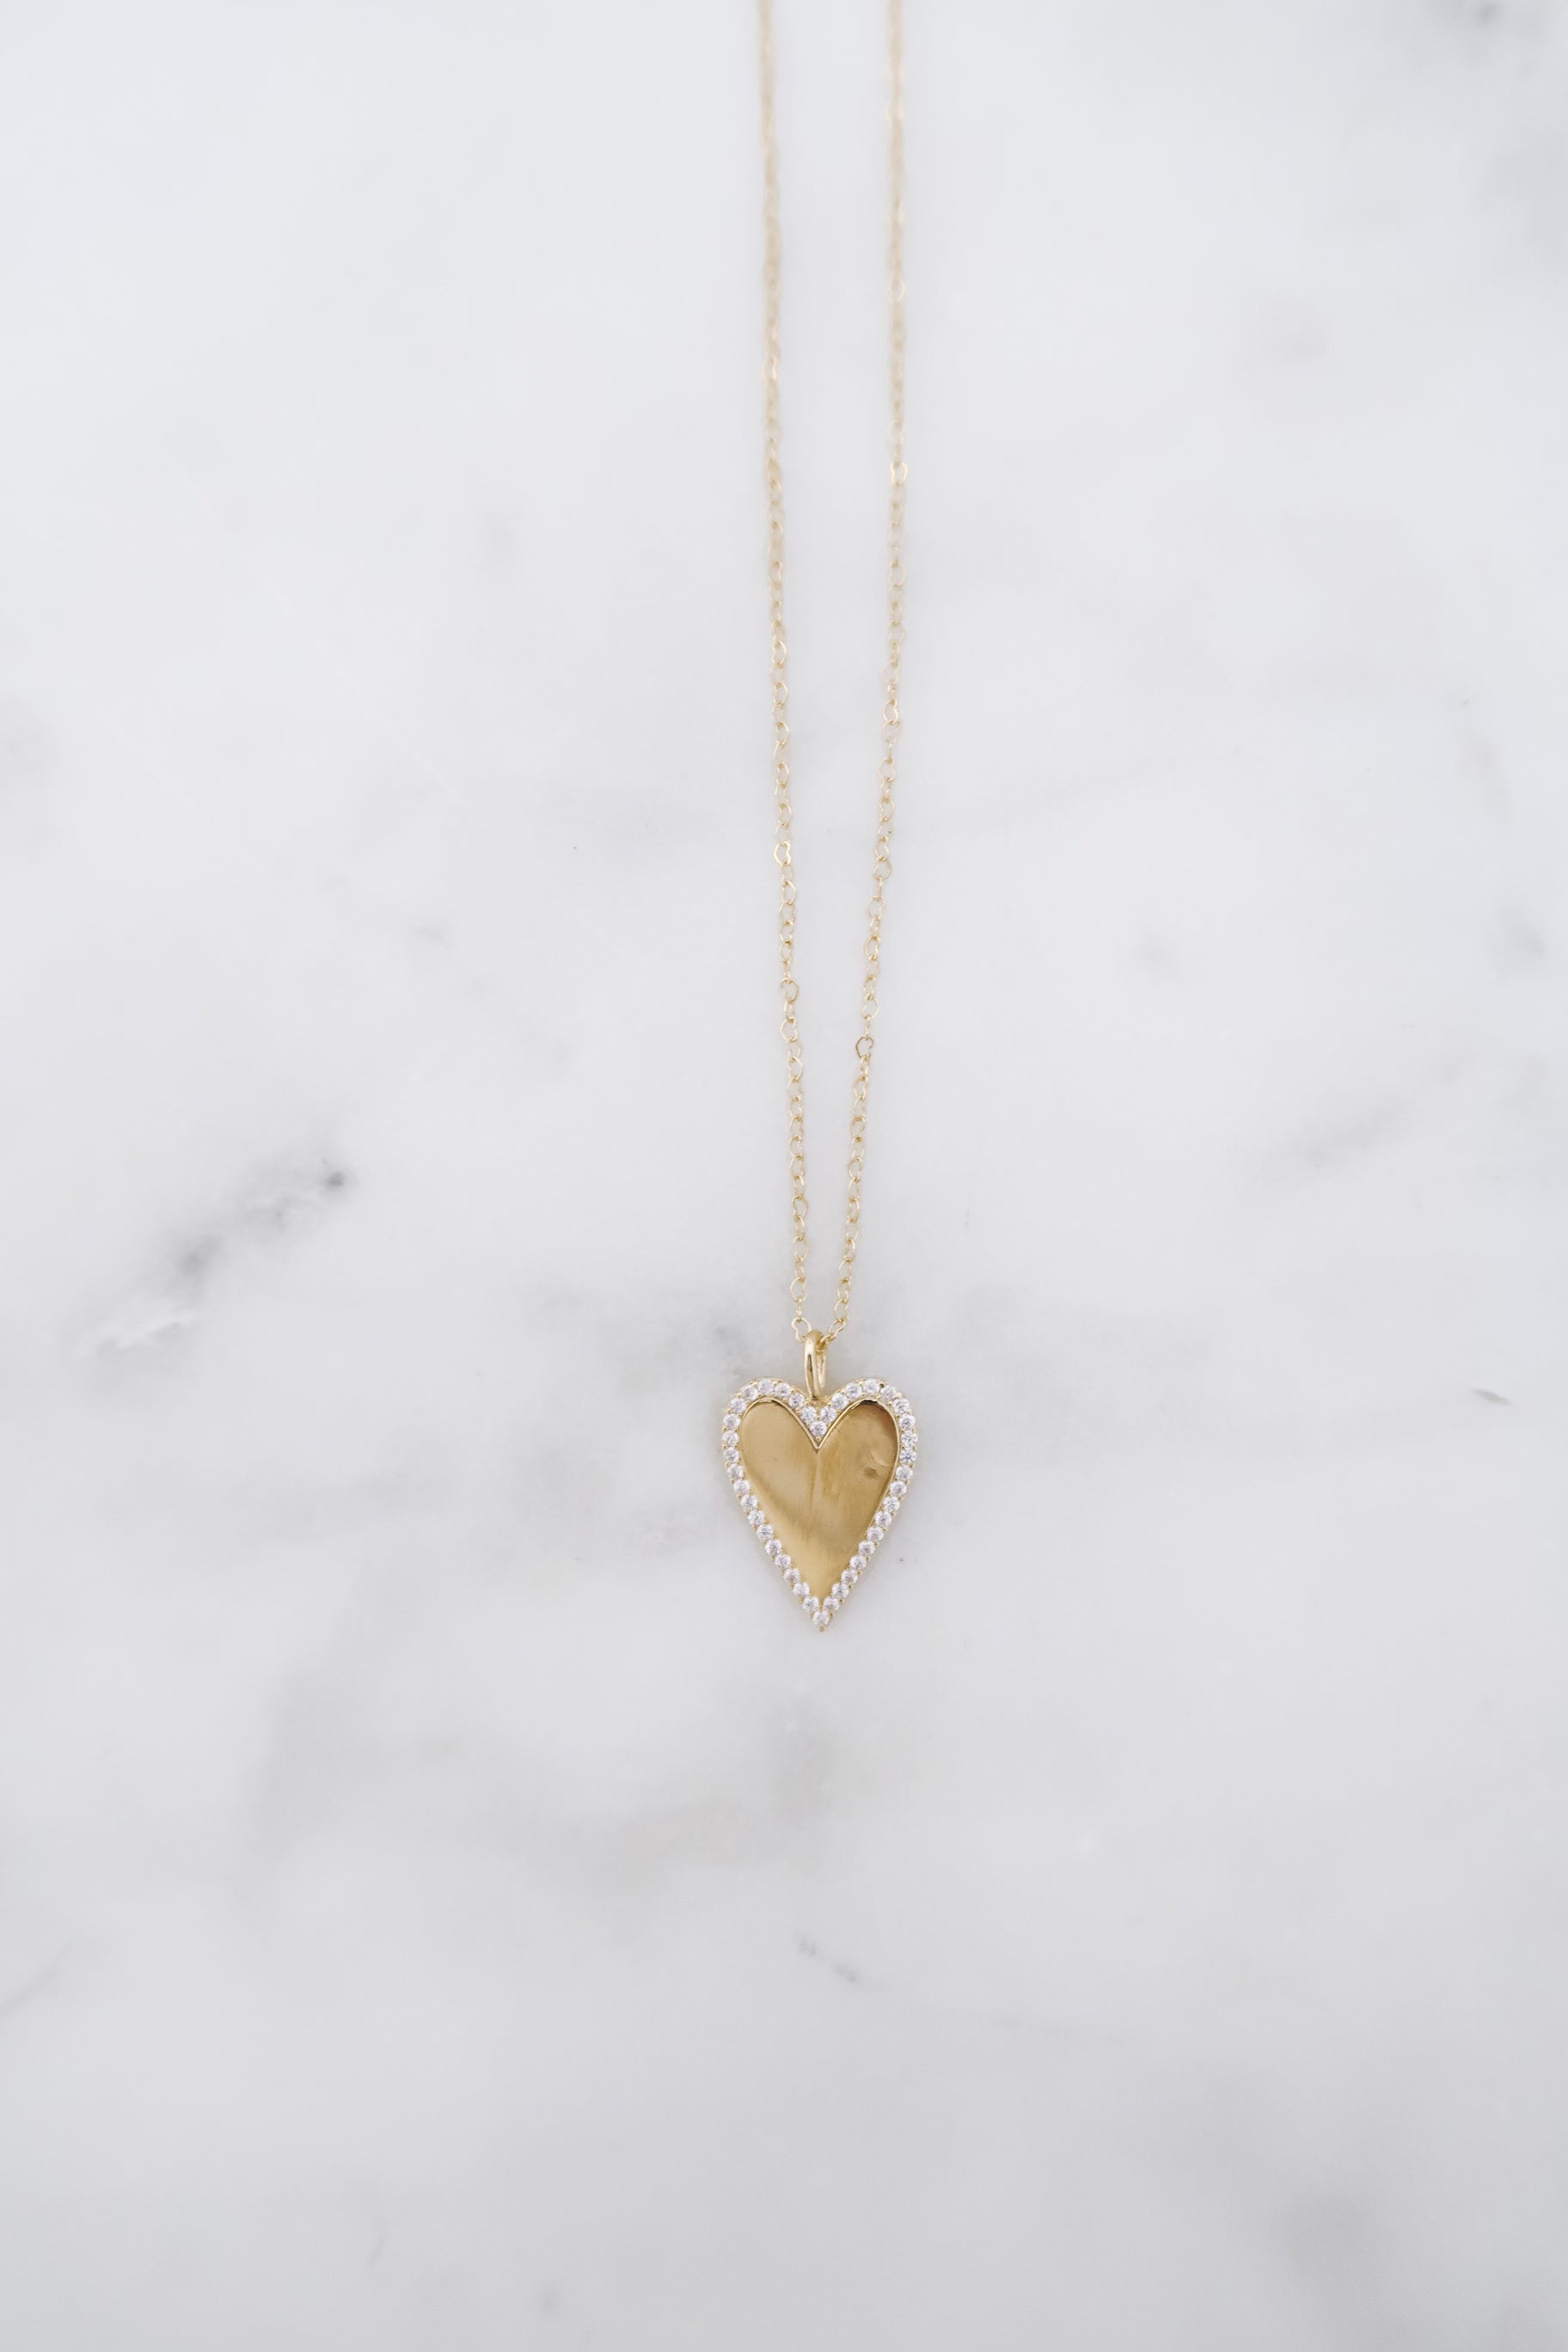 The Rhys Heart Necklace